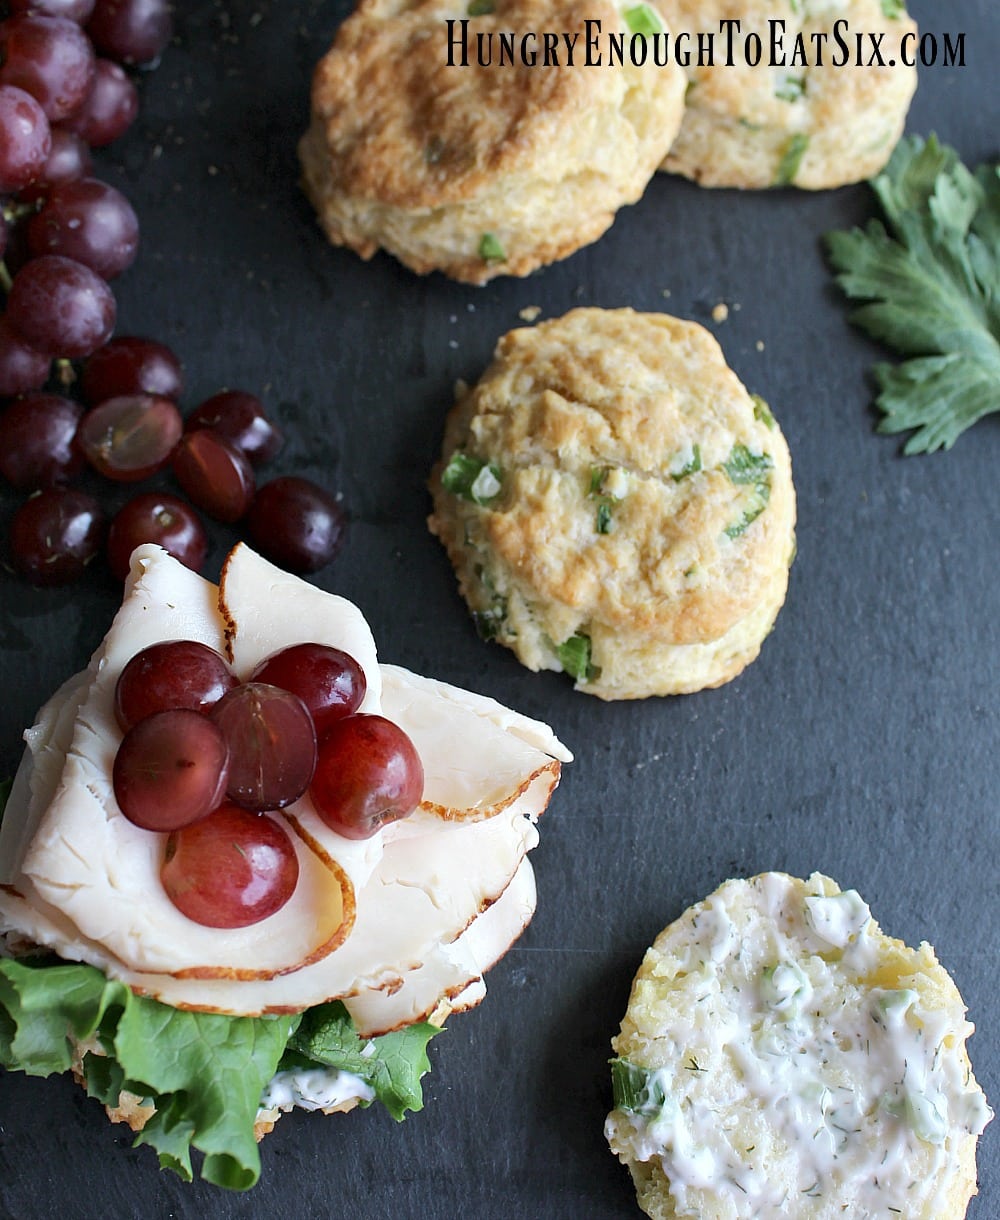 deli chicken on a biscuit with grapes